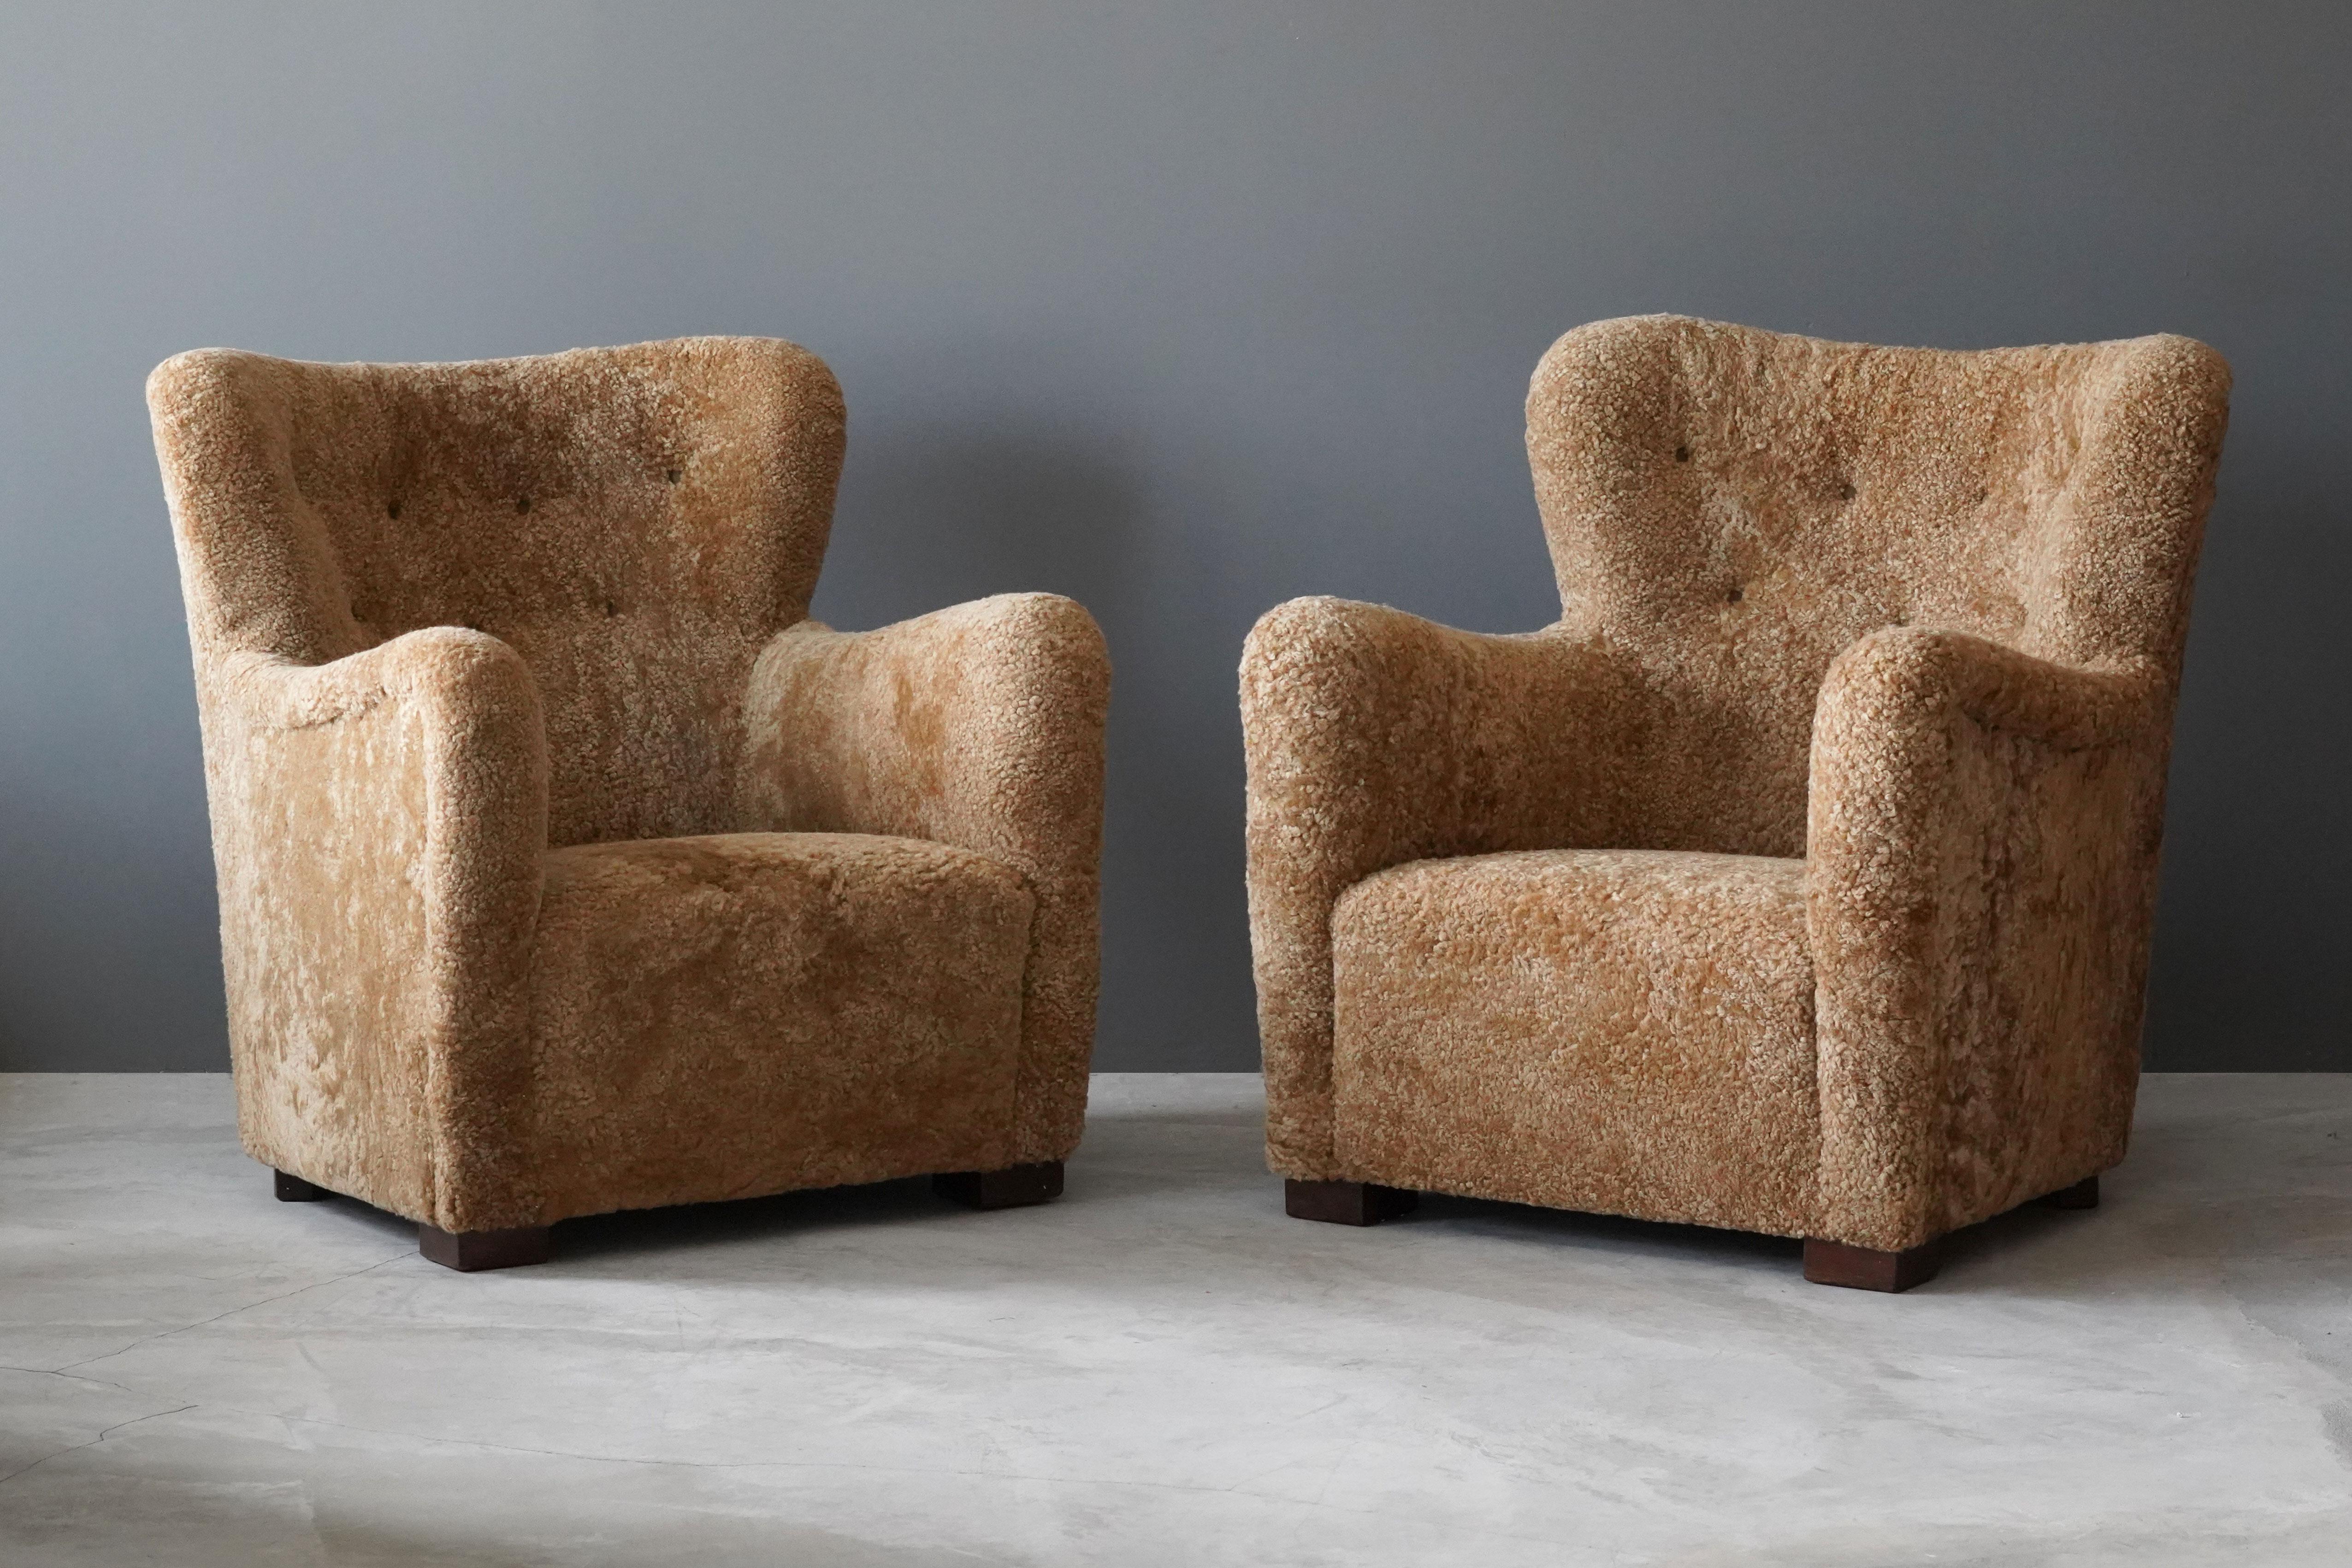 A pair of organic lounge chairs / arm chairs, designed by an unknown danish designer, 1940s, Denmark. Reupholstered in brand new authentic sheepskin / shearling / lambskin.

In the manner of Flemming Lassen or Viggo Boesen.